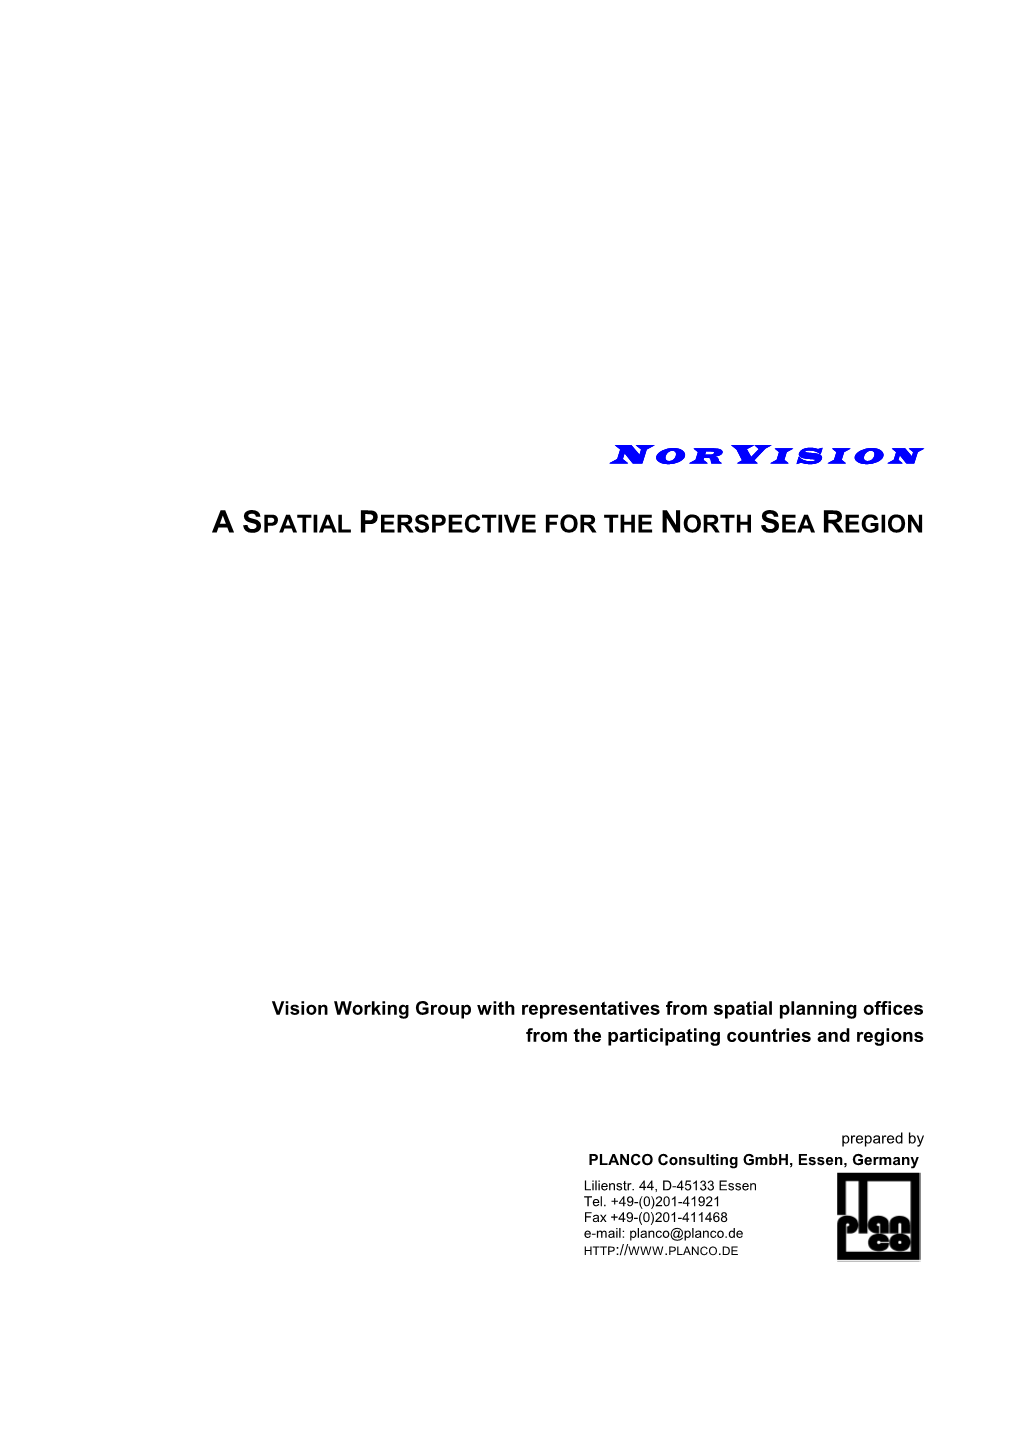 A Spatial Perspective for the North Sea Region